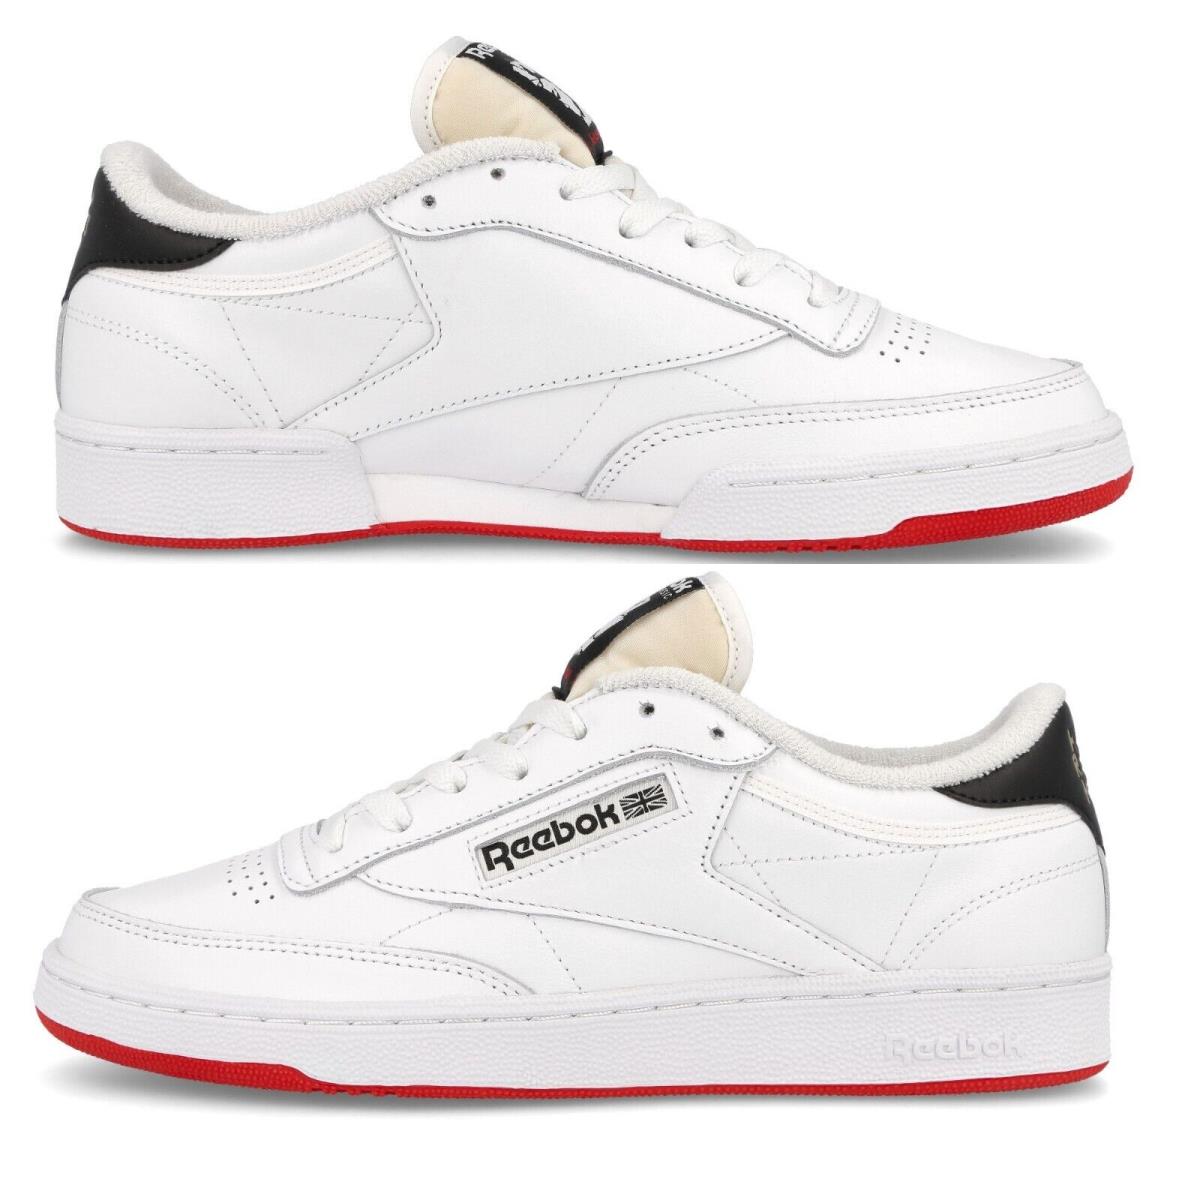 Reebok shoes  - Footwear White / Chalk White / Vector Red / Green 5